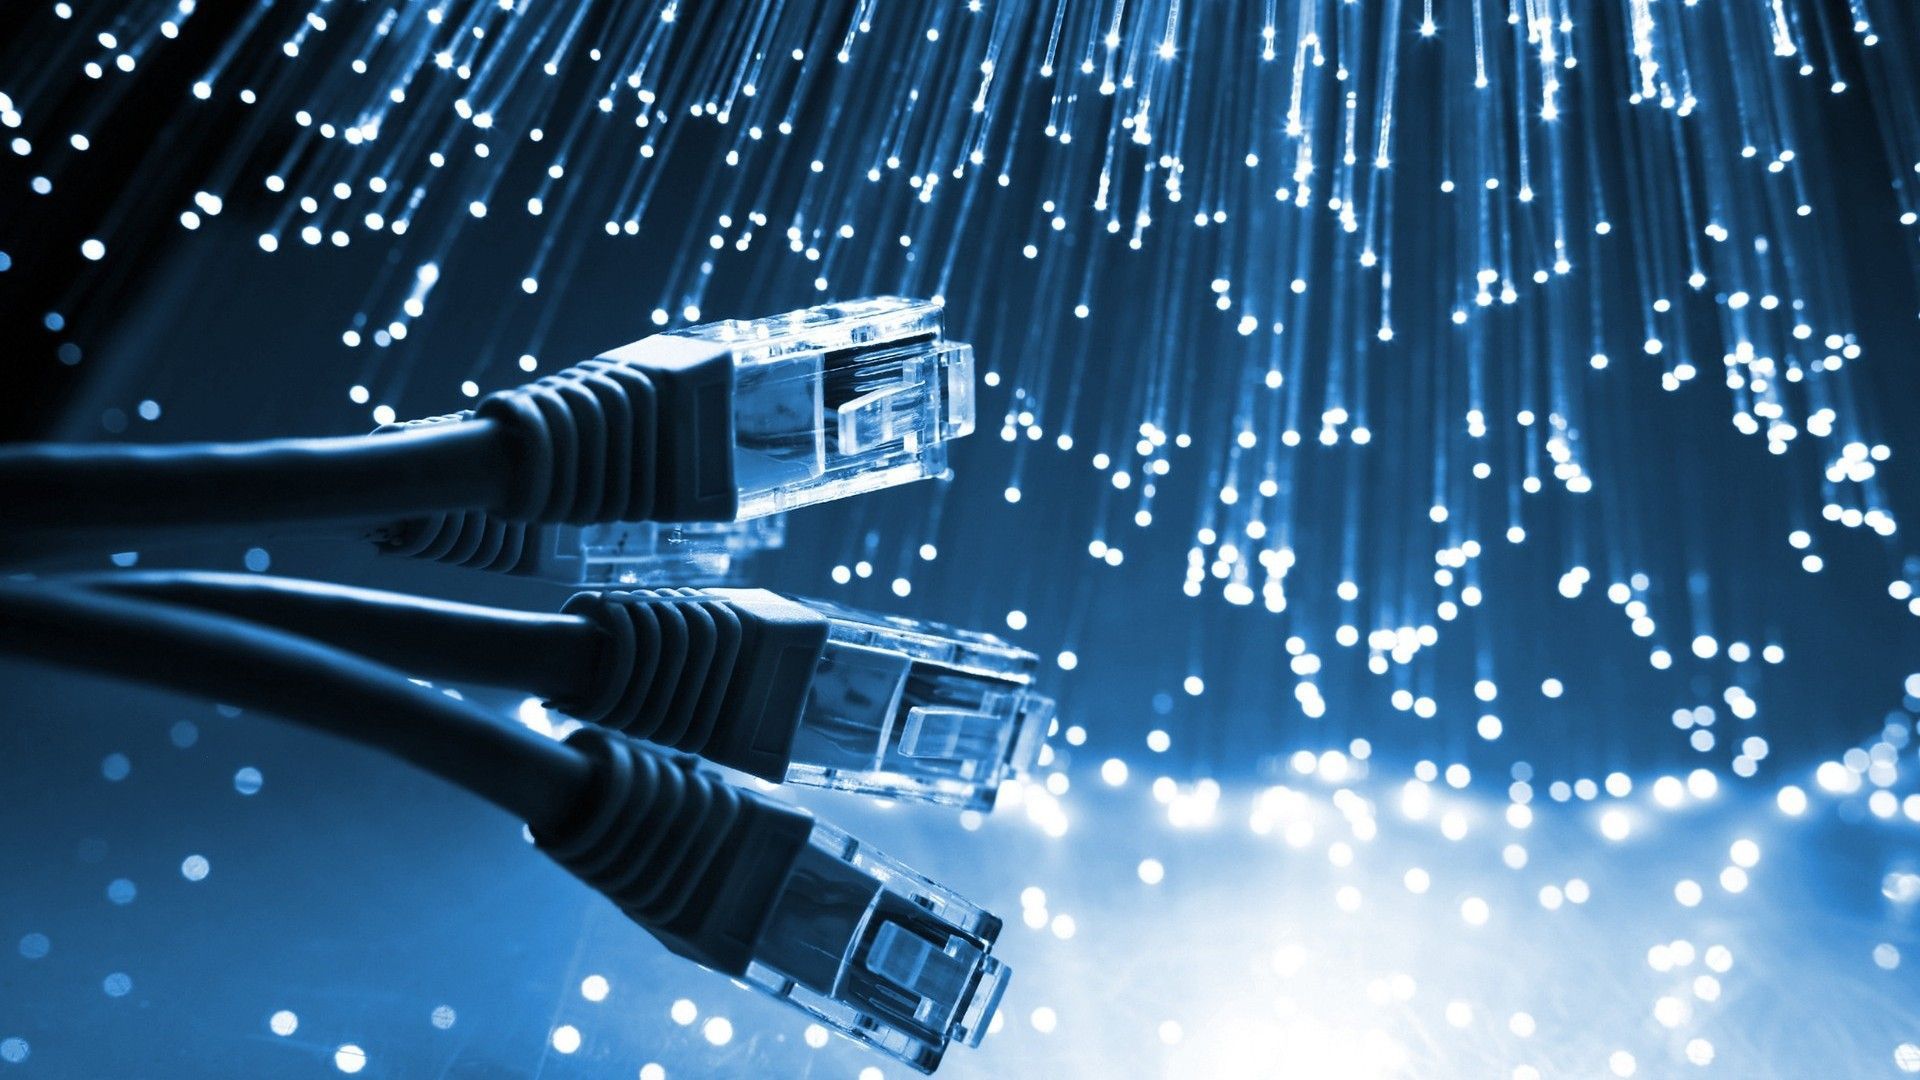 Computer Networking Cable Hi tech Wallpaper - New HD Backgrounds